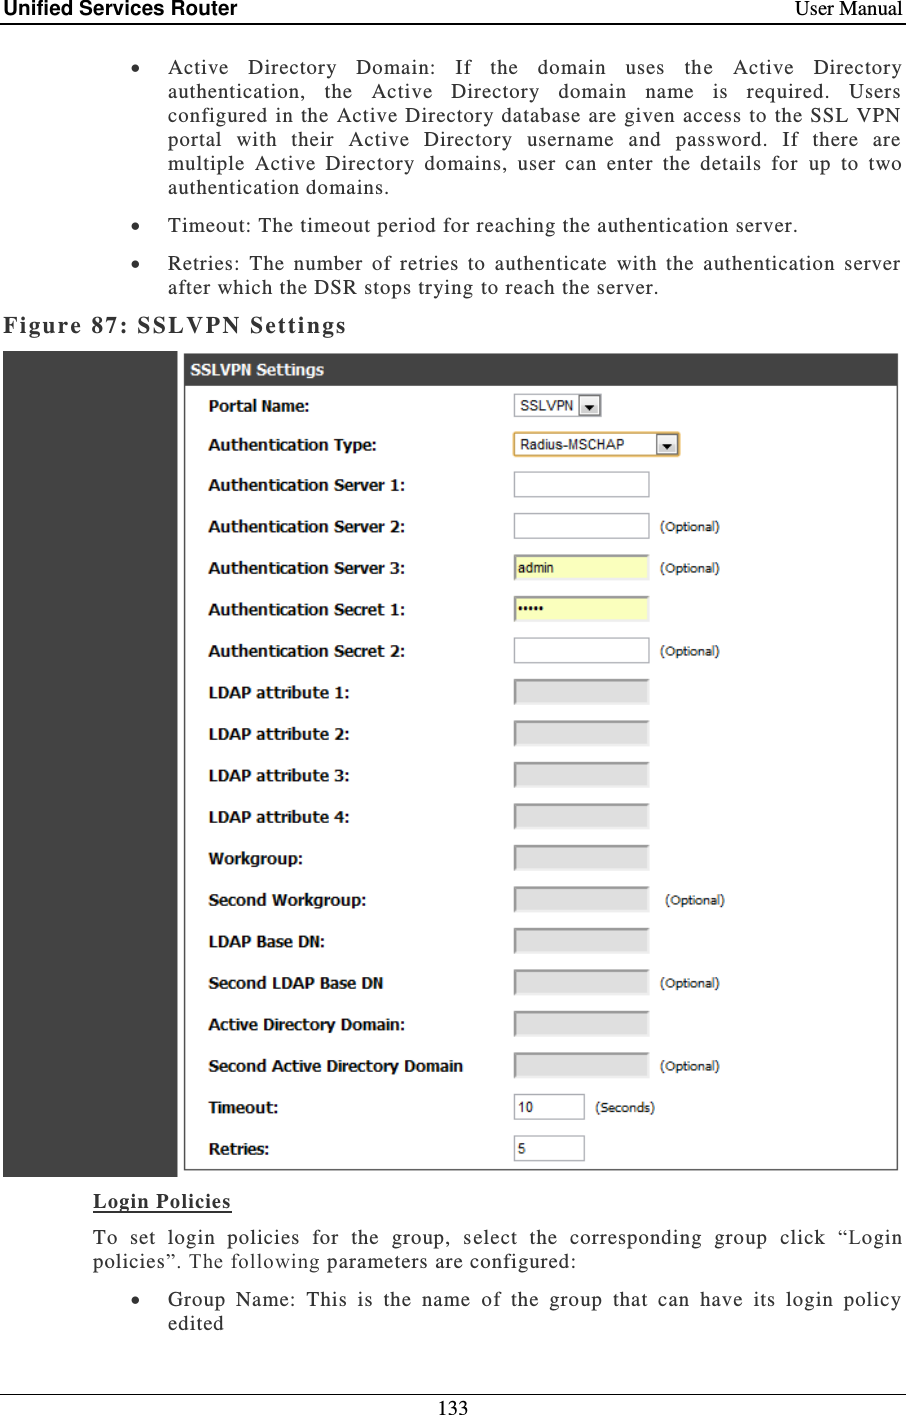 Unified Services Router    User Manual 133   Active  Directory  Domain:  If  the  domain  uses  the  Active  Directory authentication,  the  Active  Directory  domain  name  is  required.  Users configured  in  the Active  Directory database are given access to the SSL  VPN portal  with  their  Active  Directory  username  and  password.  If  there  are multiple  Active  Directory  domains,  user  can  enter  the  details  for  up  to  two authentication domains.  Timeout: The timeout period for reaching the authentication server.   Retries:  The  number  of  retries  to  authenticate  with  the  authentication  server after which the DSR stops trying to reach the server. Figure 87: SSLVPN  Settings    Login Policies  To  set  login  policies  for  the  group,  s elect  the  corresponding  group  click  “Login policies”. The following parameters are configured:   Group  Name:  This  is  the  name  of  the  group  that  can  have  its  login  policy edited 